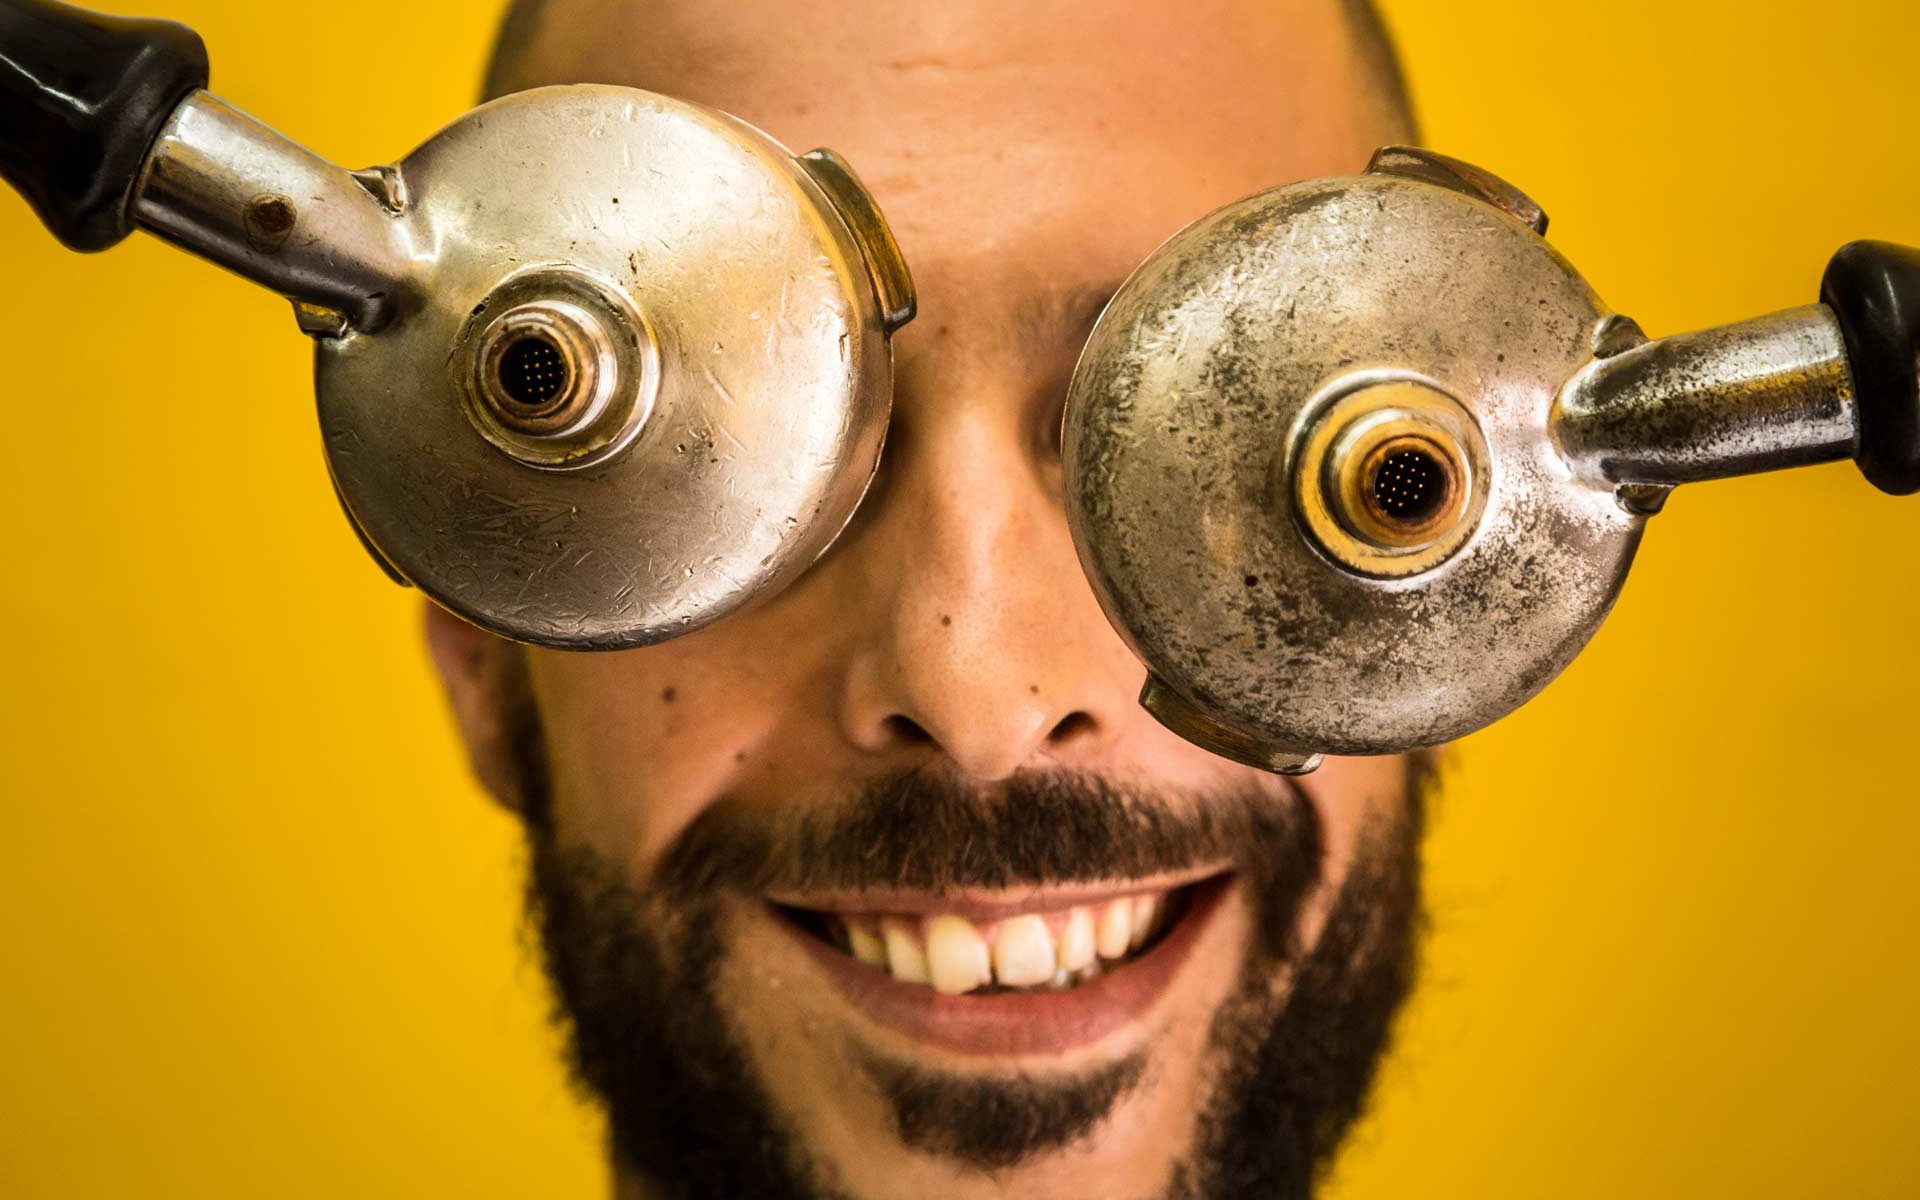 expresso machine head-covering eyes-portrait-yellow background